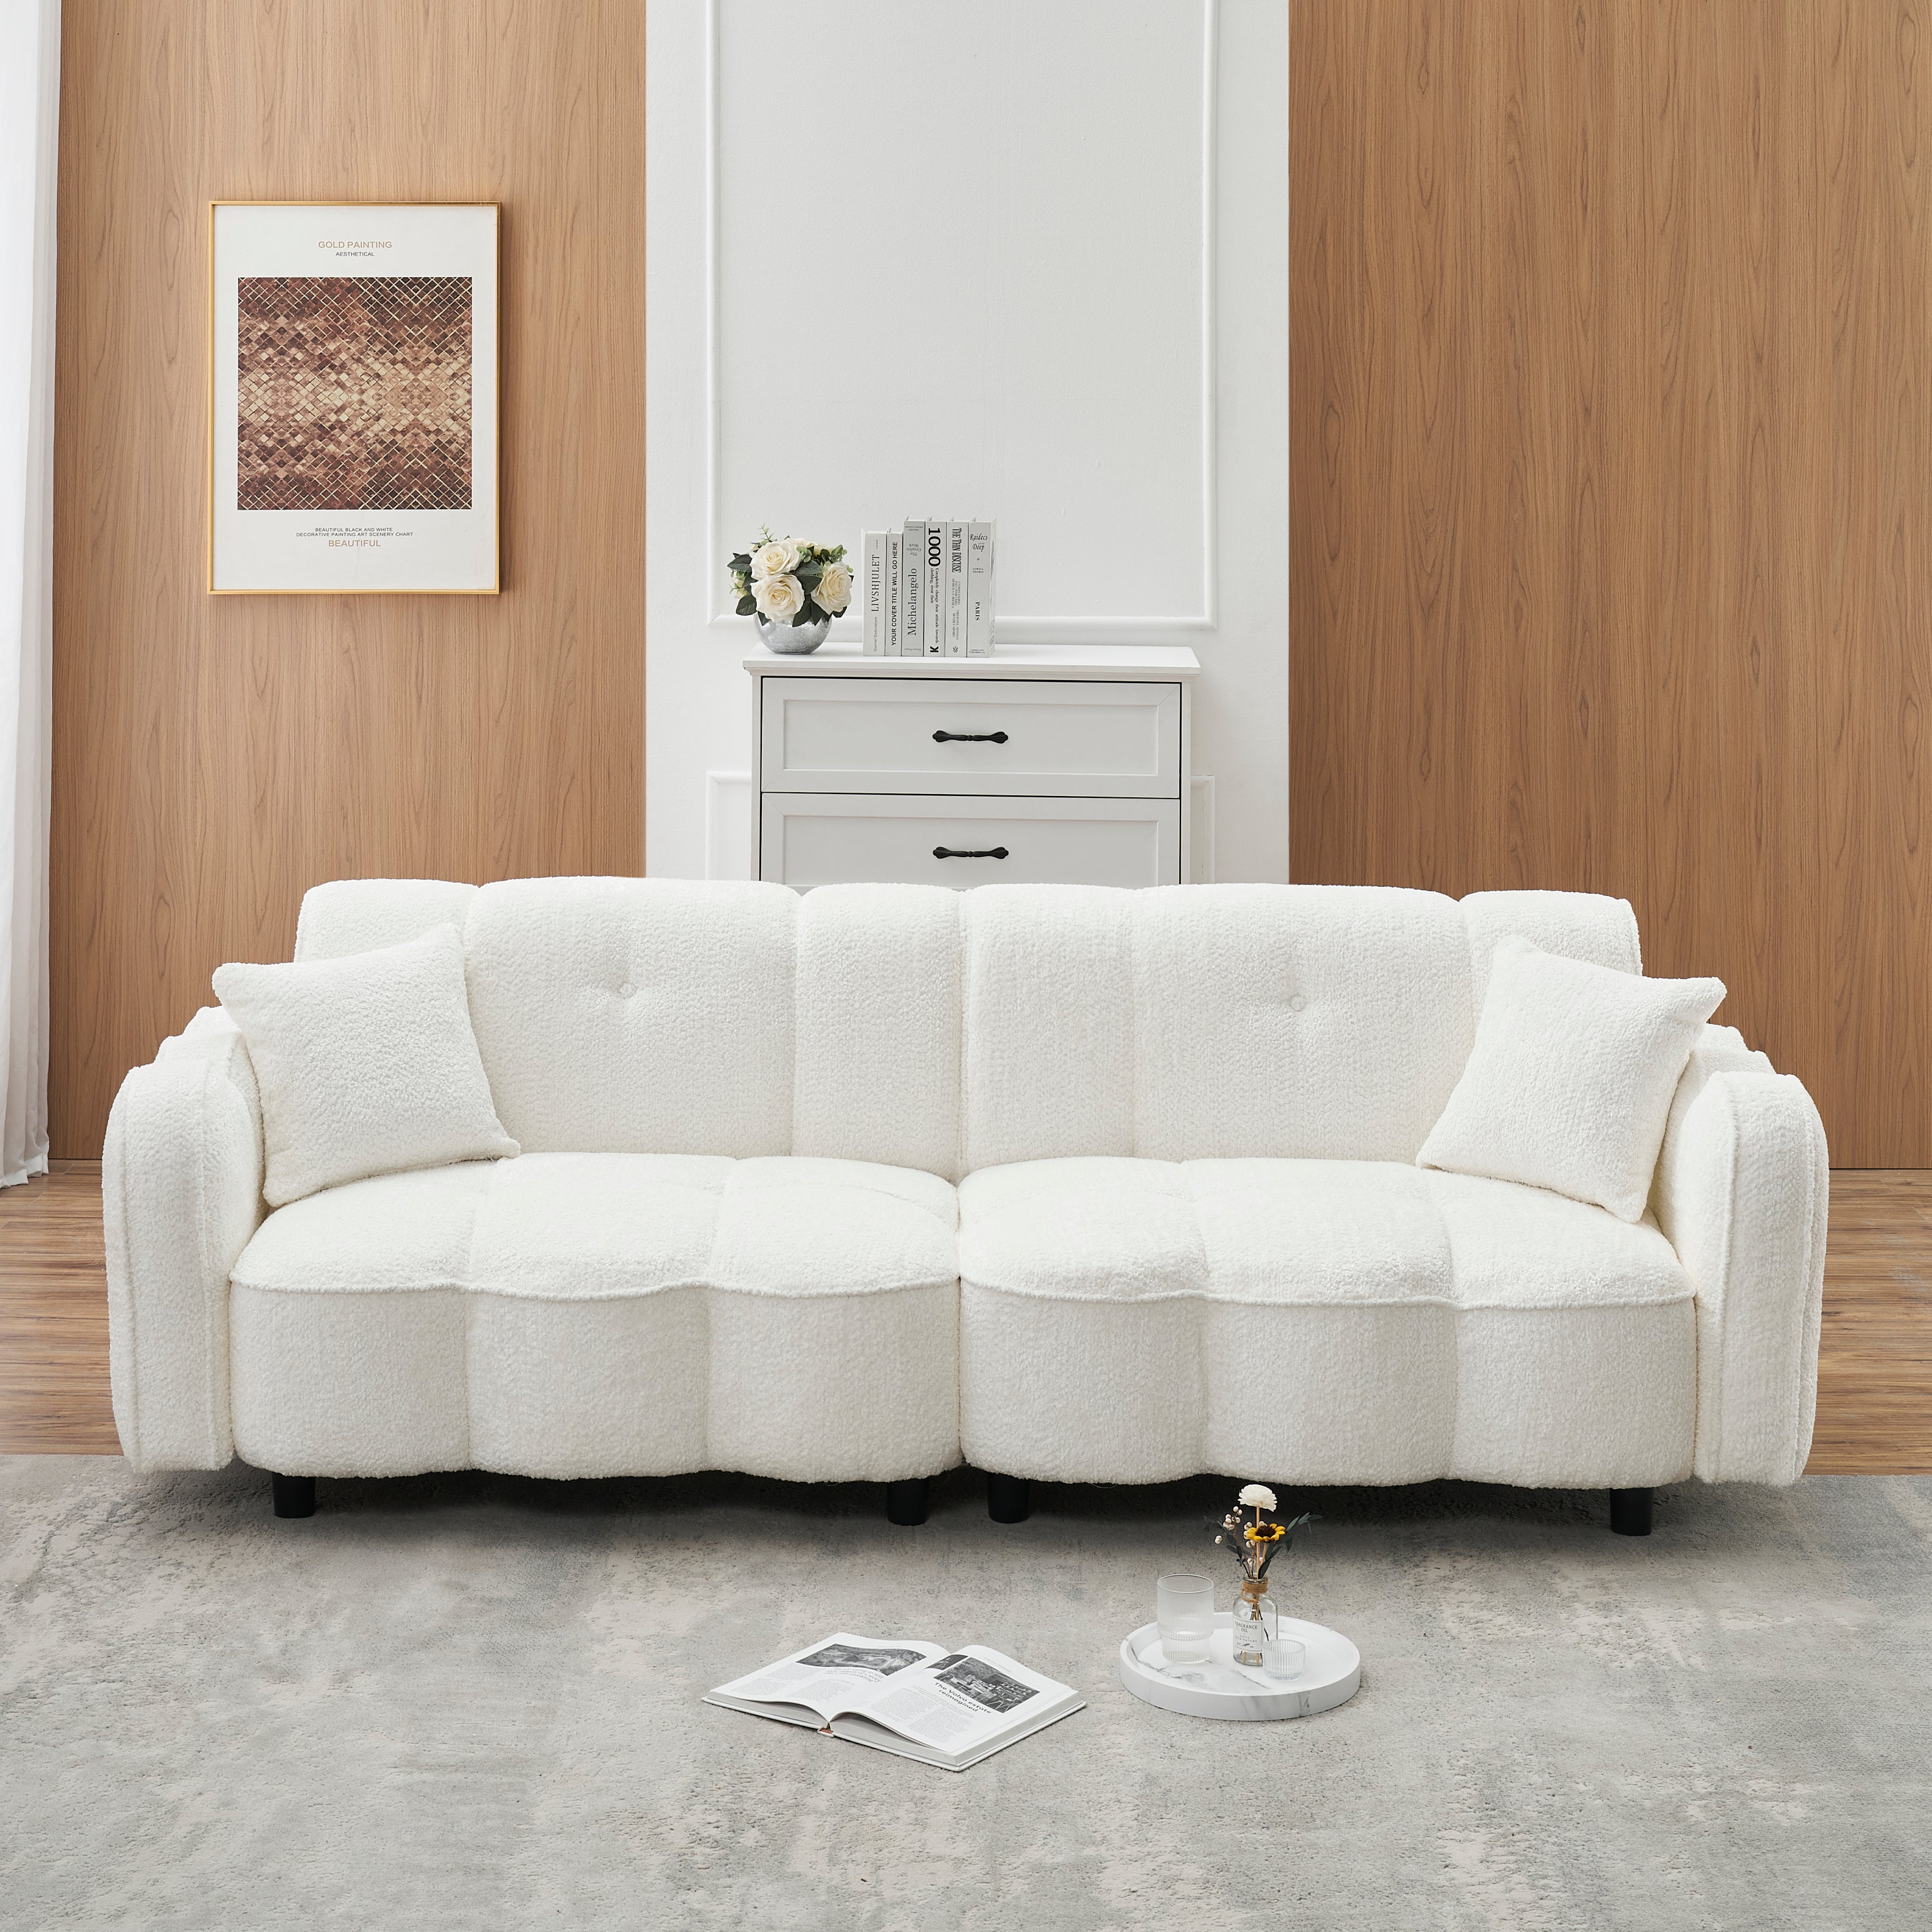 🆓🚛 96.06" Large Teddy Plush Sofa for Living Room and Entertainment Space, White